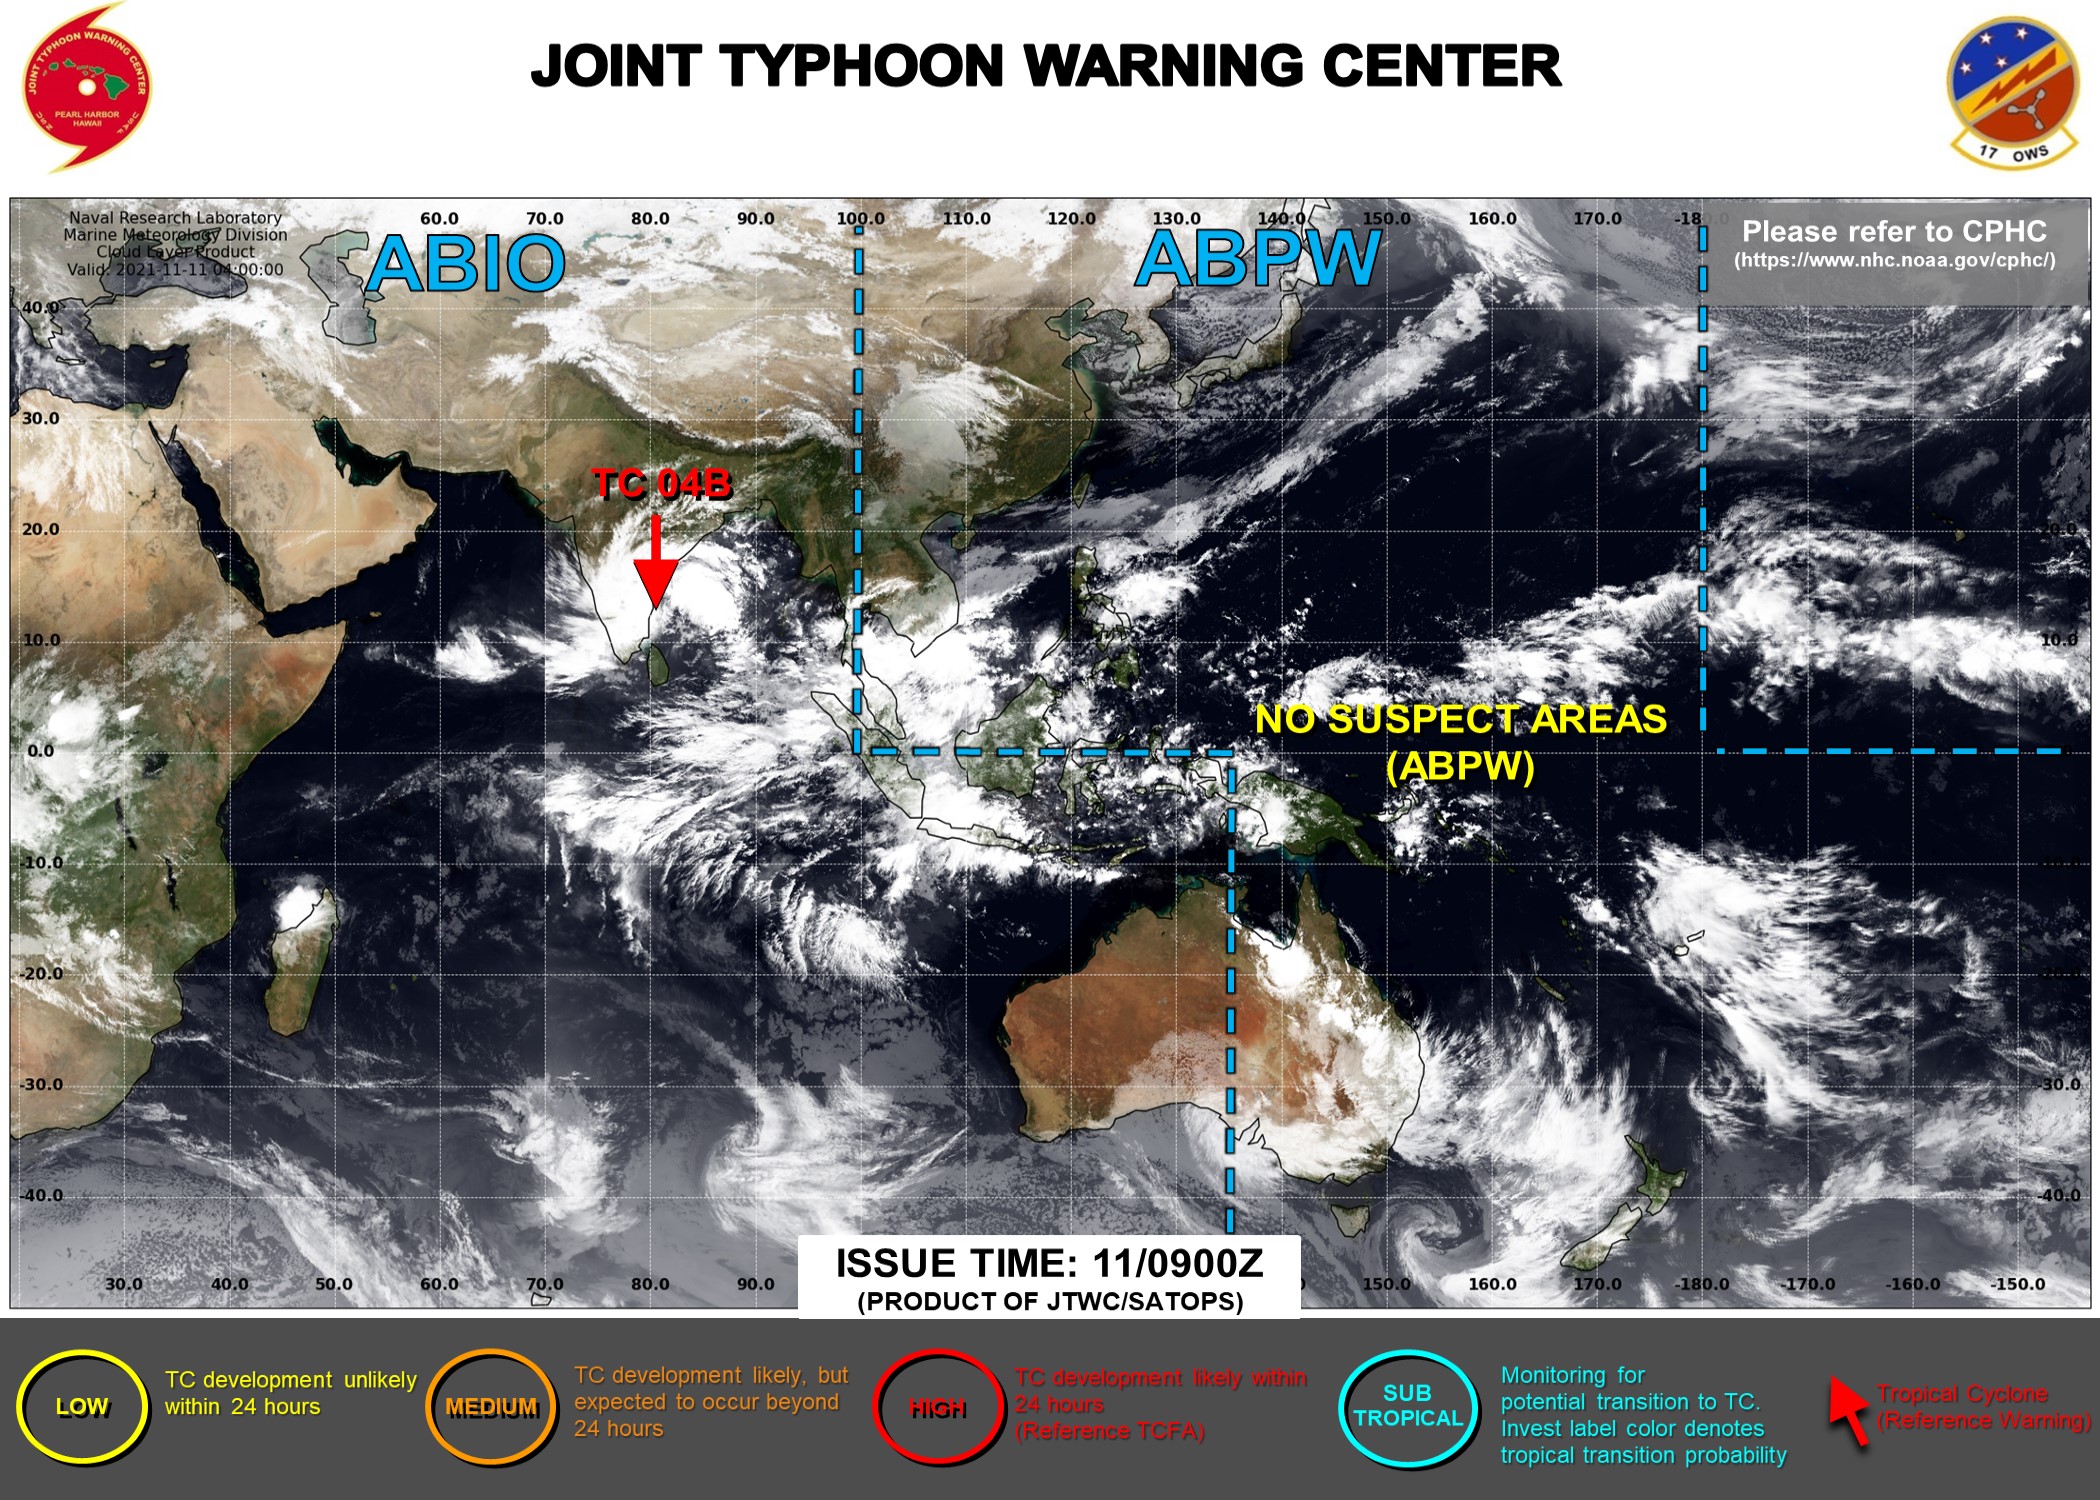 JTWC IS ISSUING 6HOURLY WARNINGS AND 3HOURLY SATELLITE BULLETINS ON TC 04B.